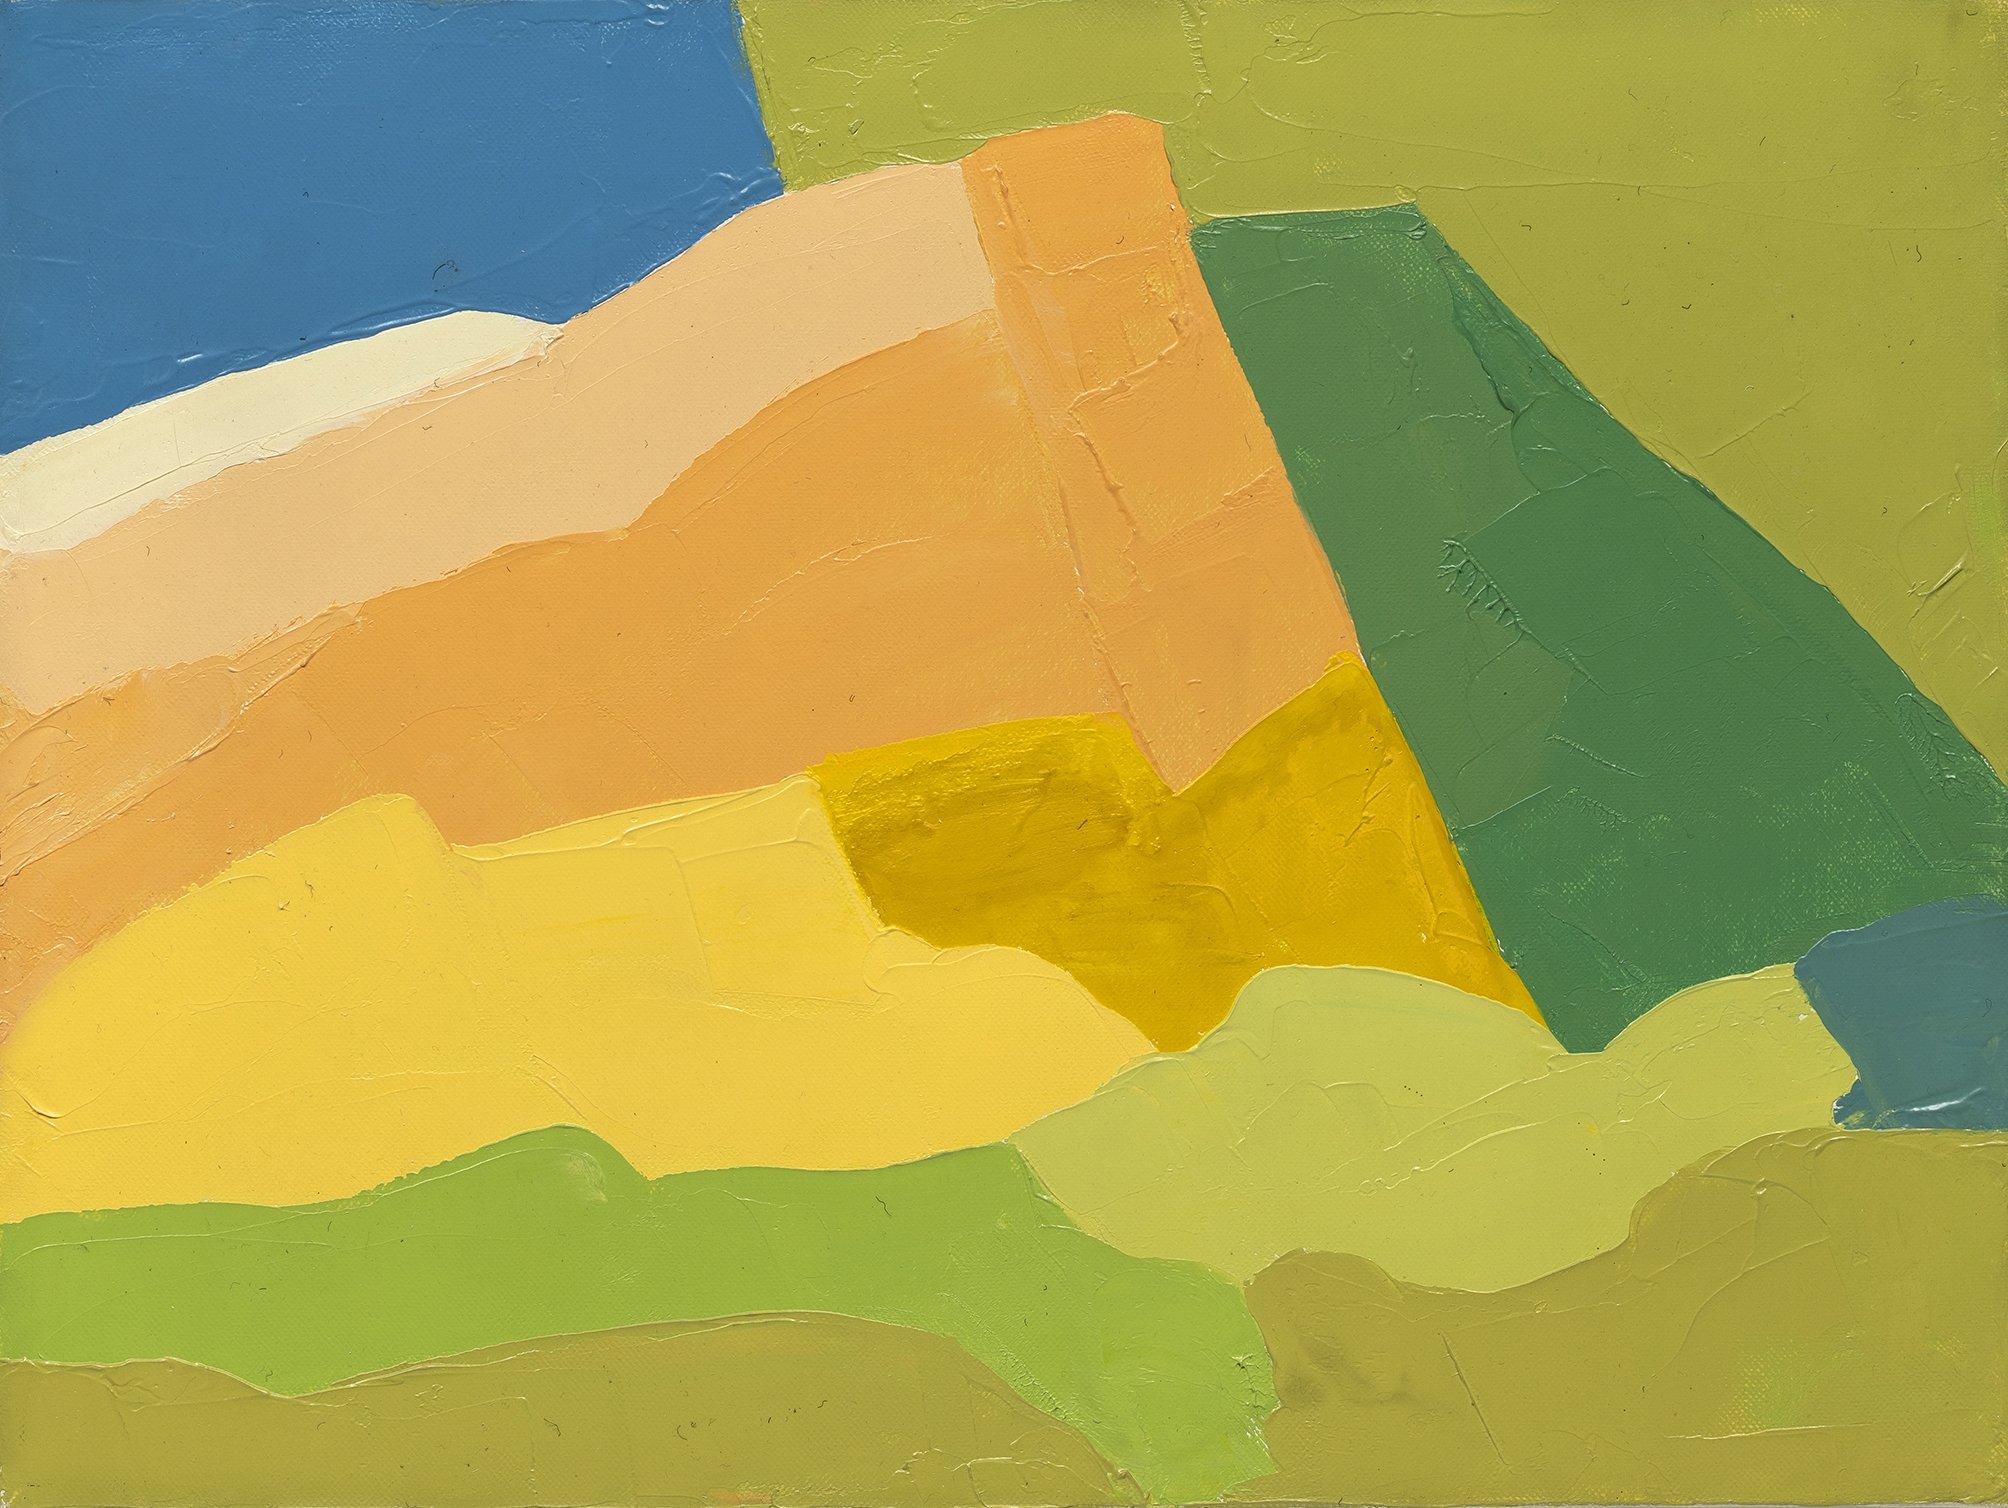 Etel Adnan, untitled, 1980, oil on canvas, 30.3 by 40.5 centimeters. (Courtesy of Pera Museum)